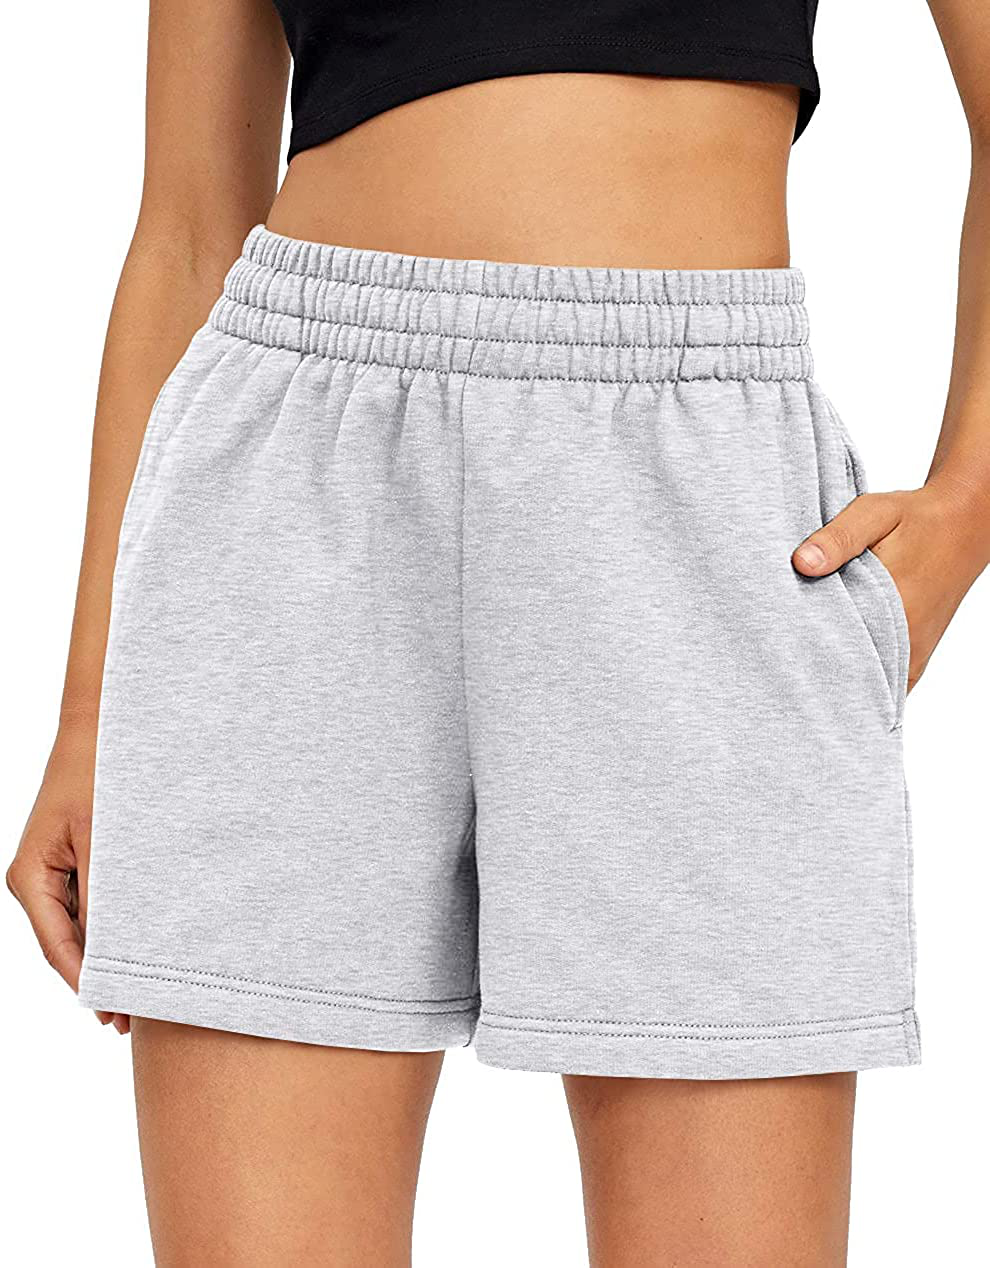  THE GYM PEOPLE Womens High Waisted Running Shorts Quick Dry  Athletic Workout Shorts